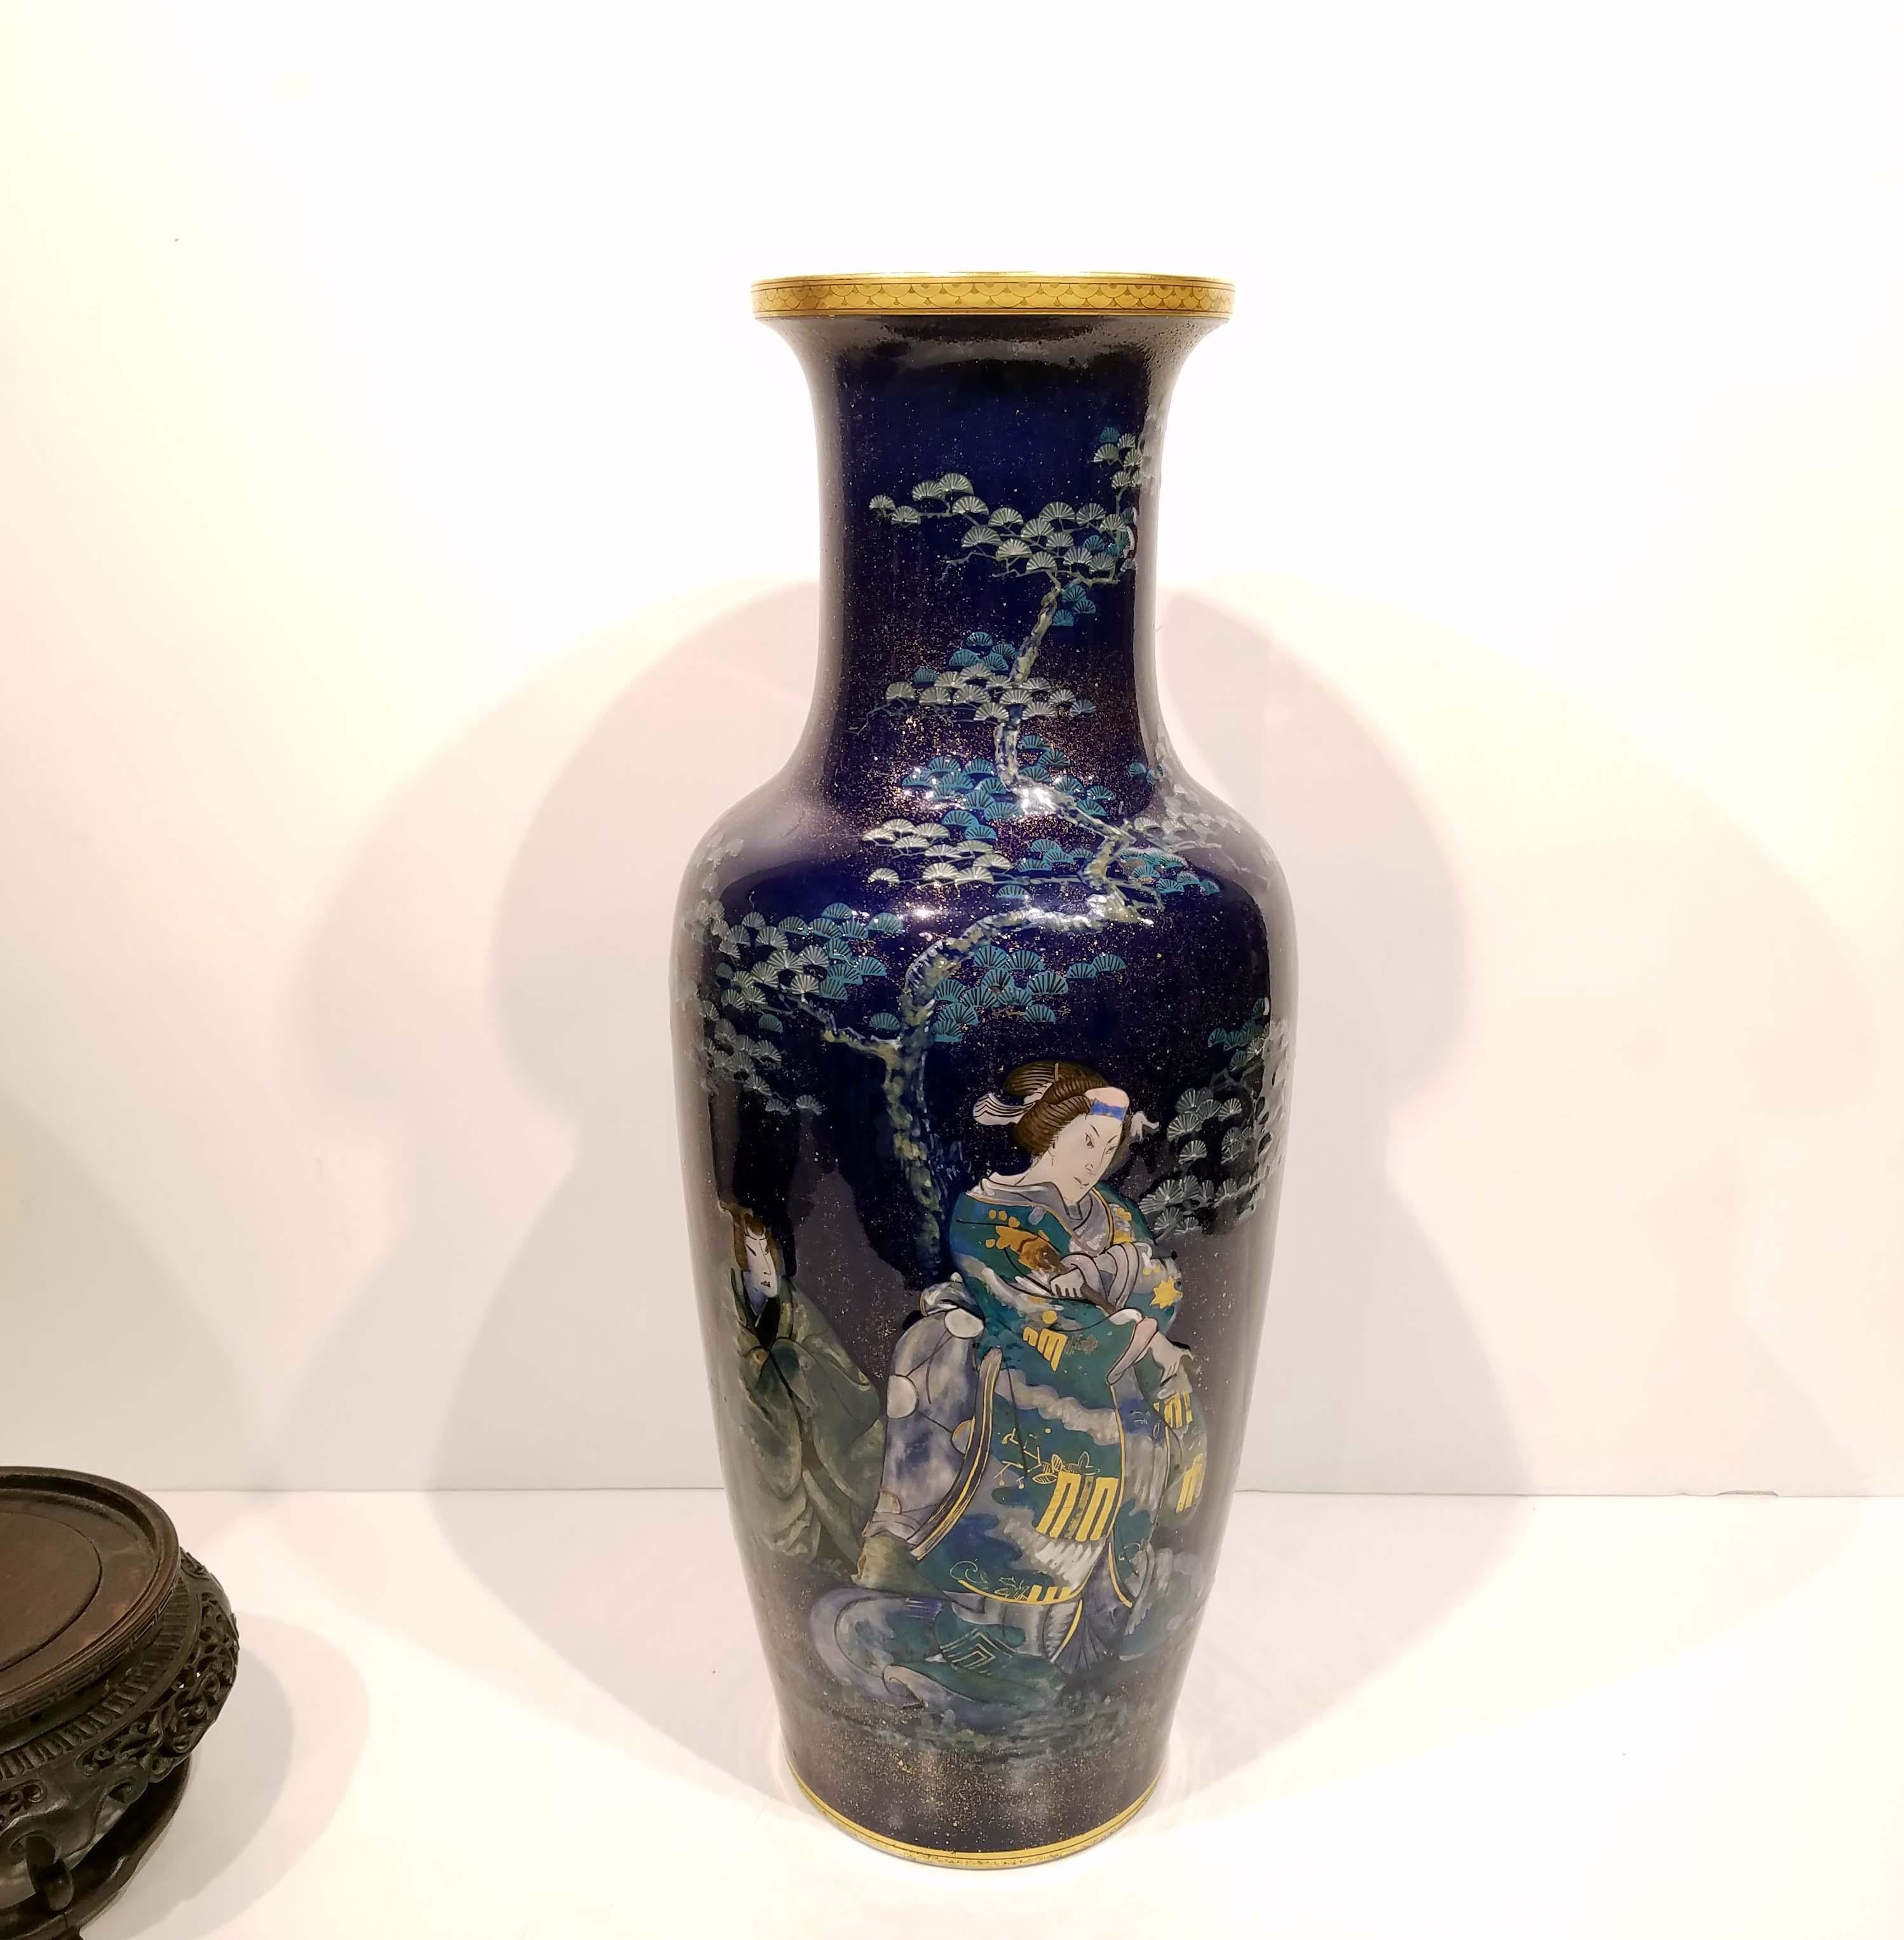 Large Pate Sur Pate Japonisme vase marked C. P. & Co. Mehun. (Charles Pillivuyt Co.) circa late 19th century with cobalt background with gold sparkles that resembles lapis lazuli and two japanese figures in kimonos in pate sur pate enamel. This is a